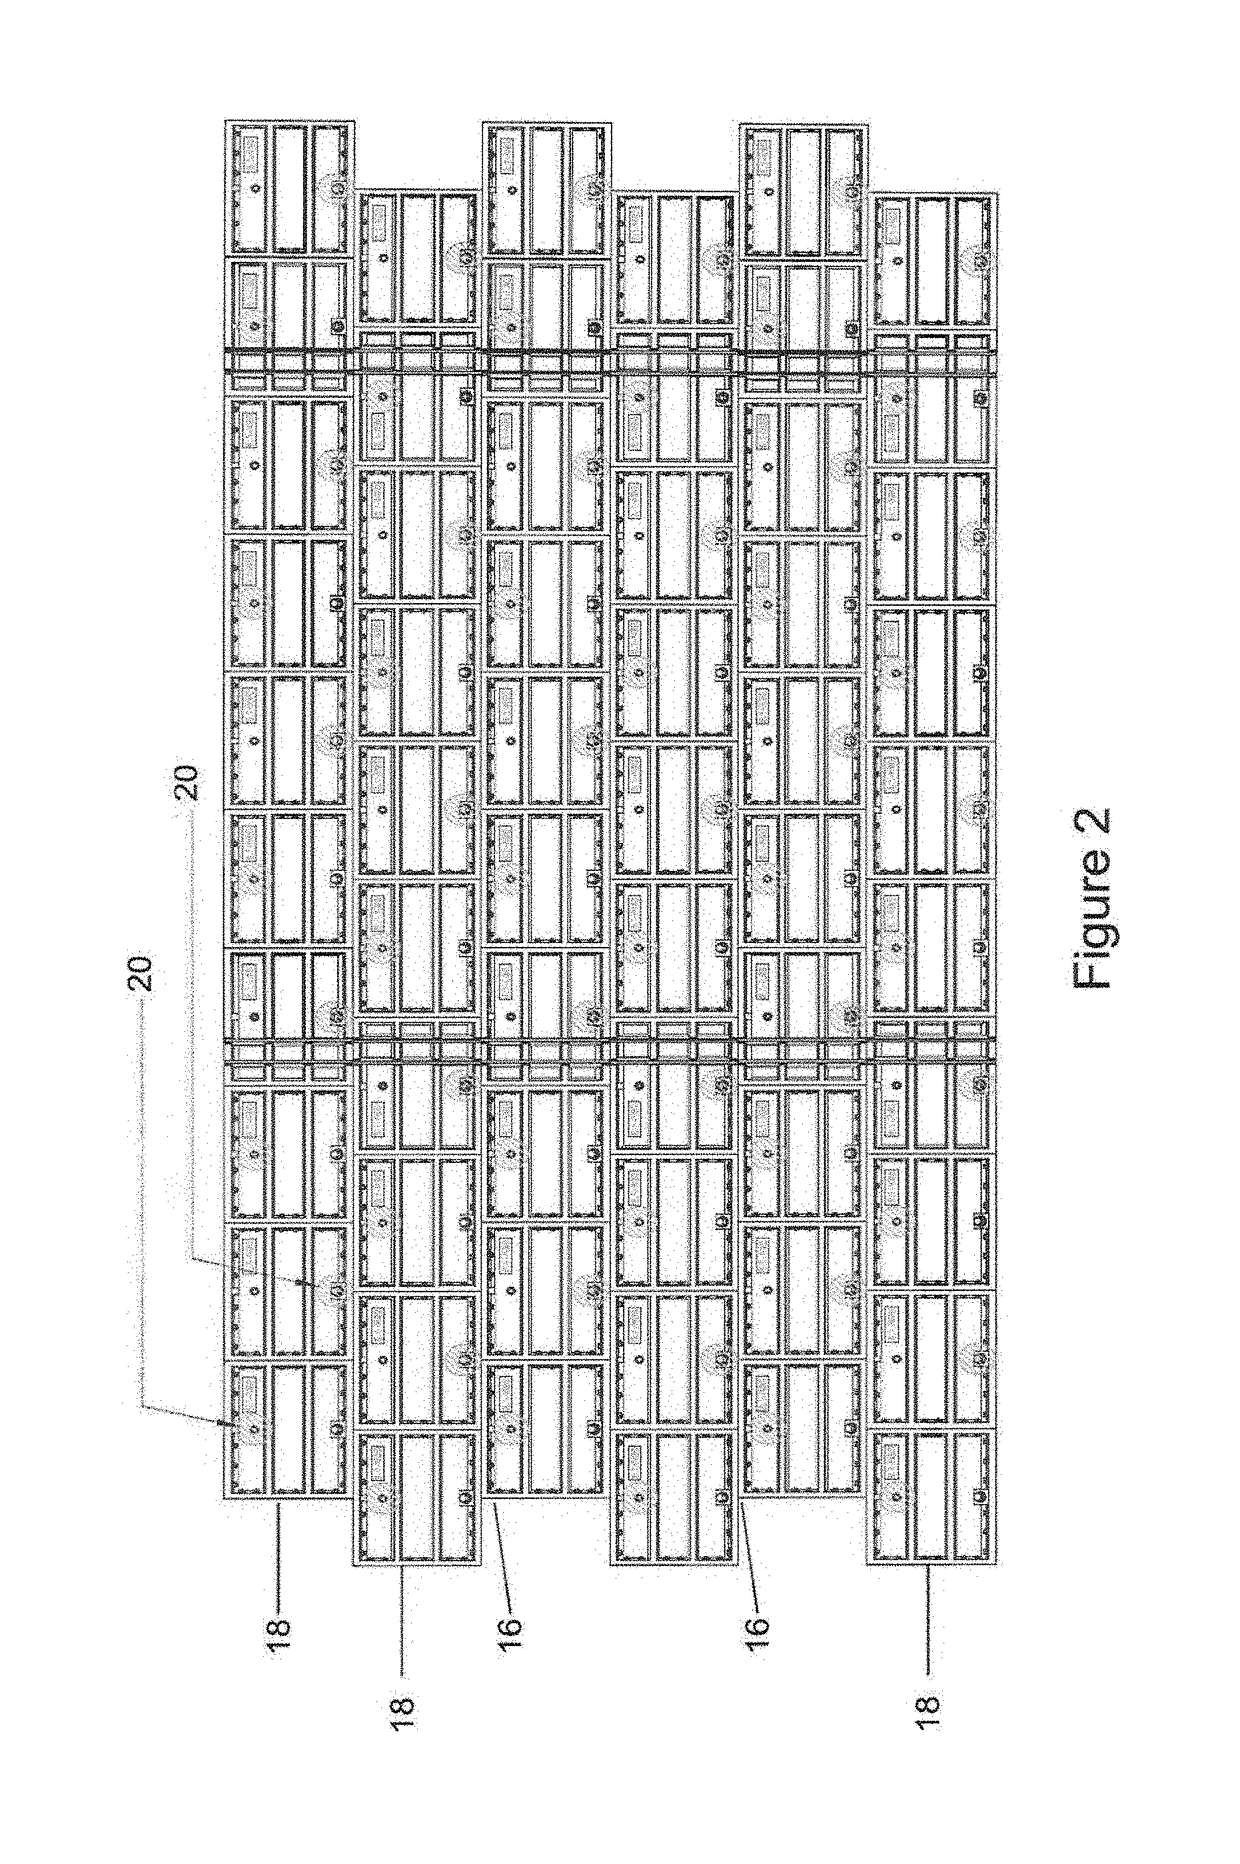 Method of limiting permeability of a matrix to limit liquid and/or gas inflow